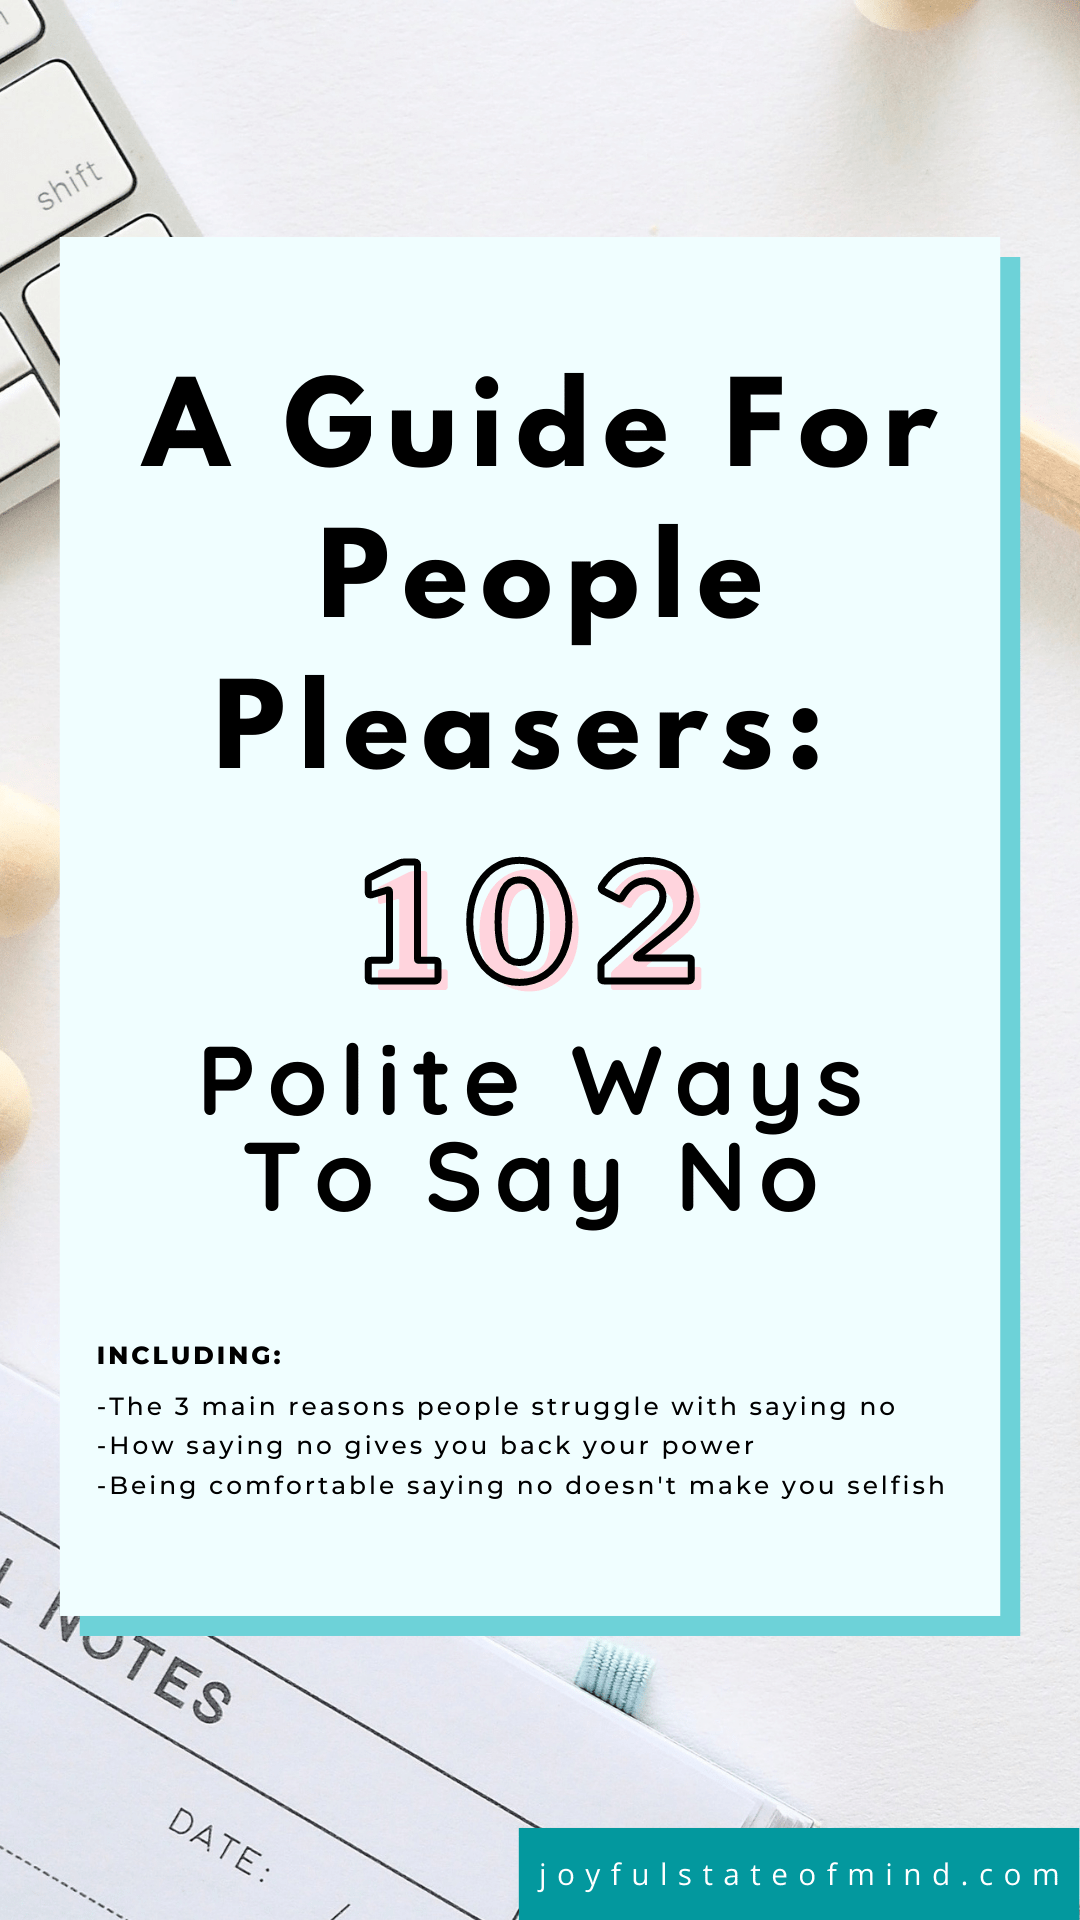 polite way to say no for people pleasers